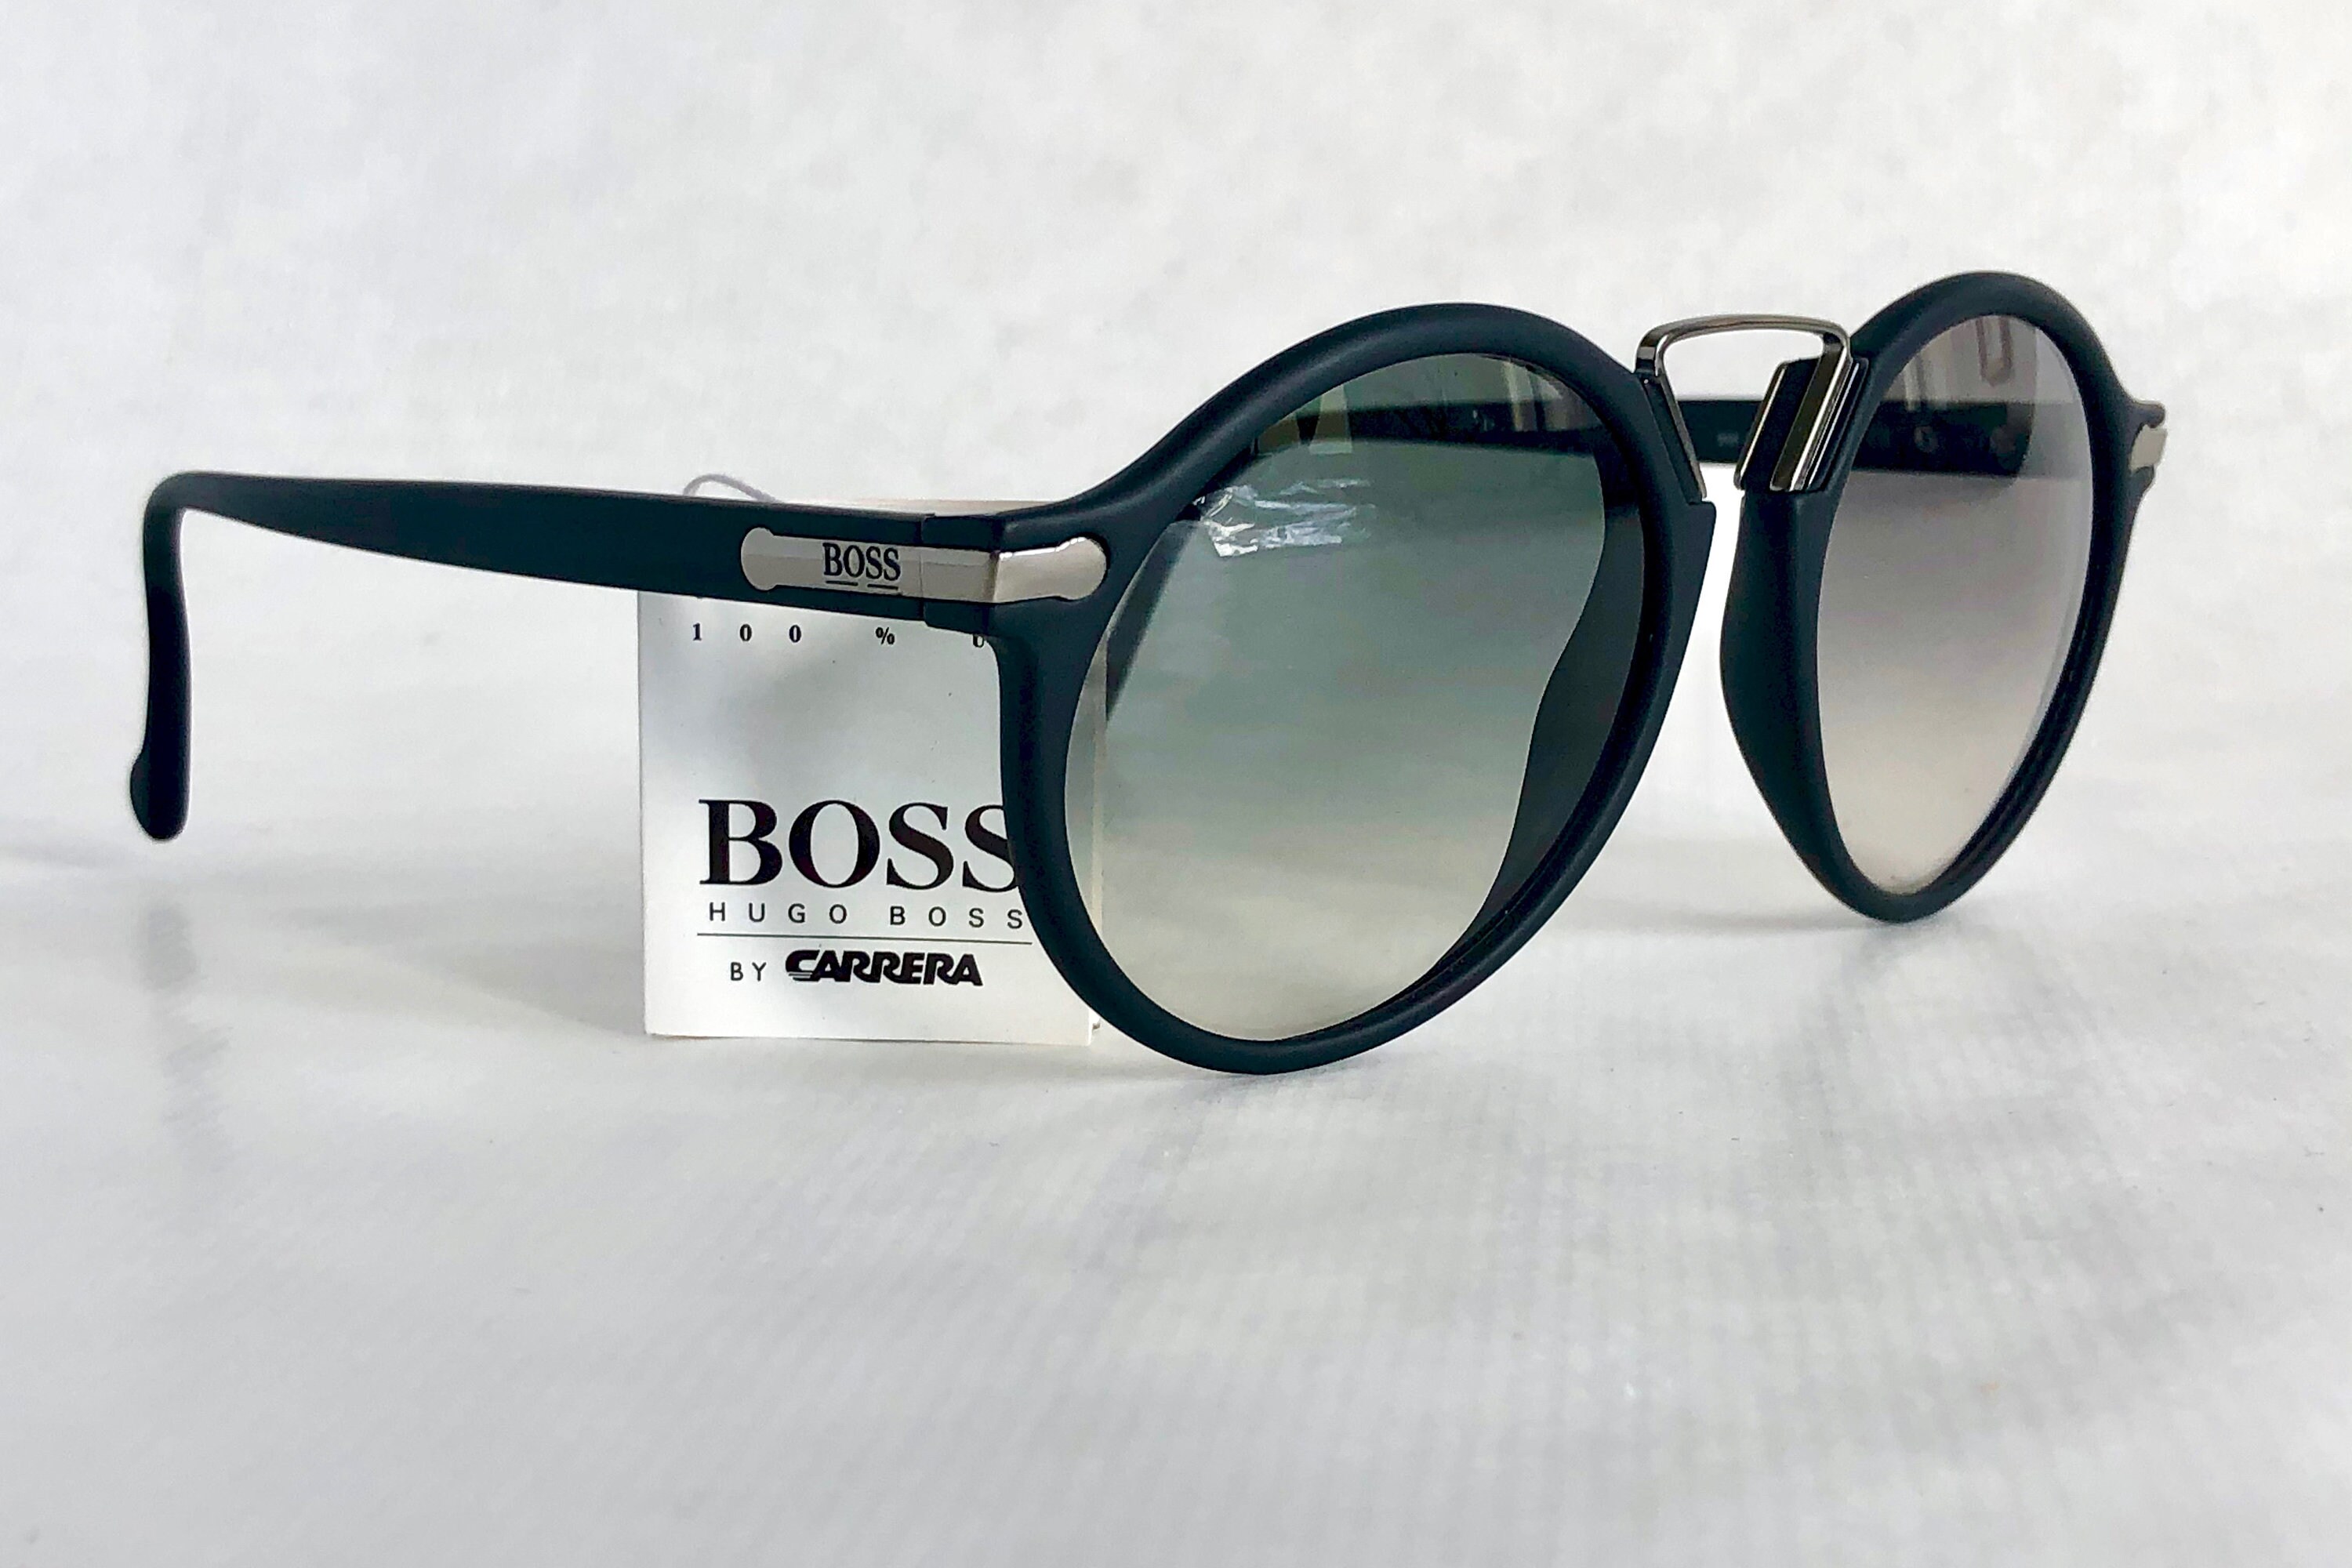 Hugo Boss by Carrera 5151 Vintage Sunglasses - New Old Stock - Made in  Austria